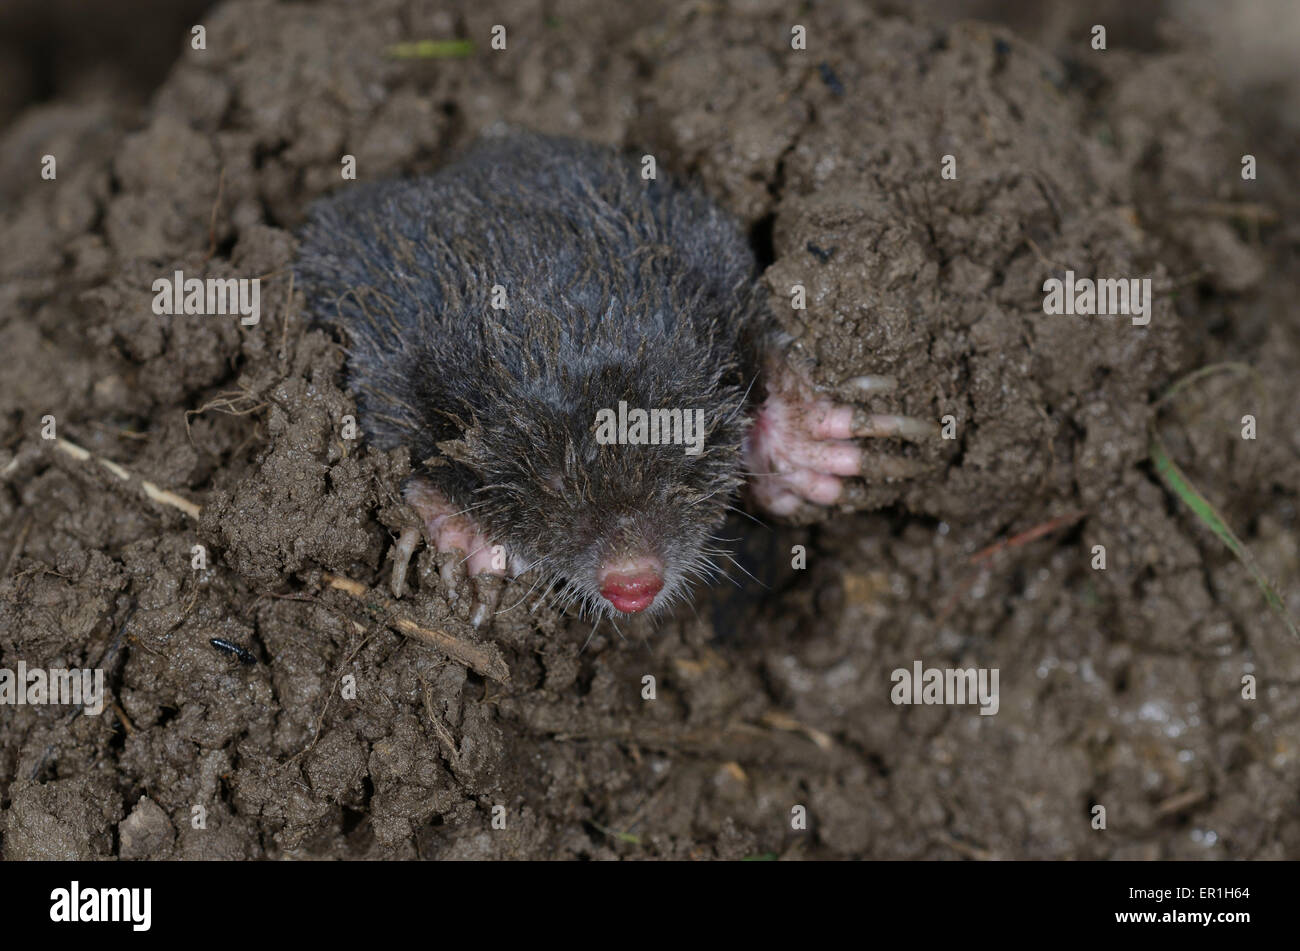 A mole emerging from the earth showing its big feet UK Stock Photo